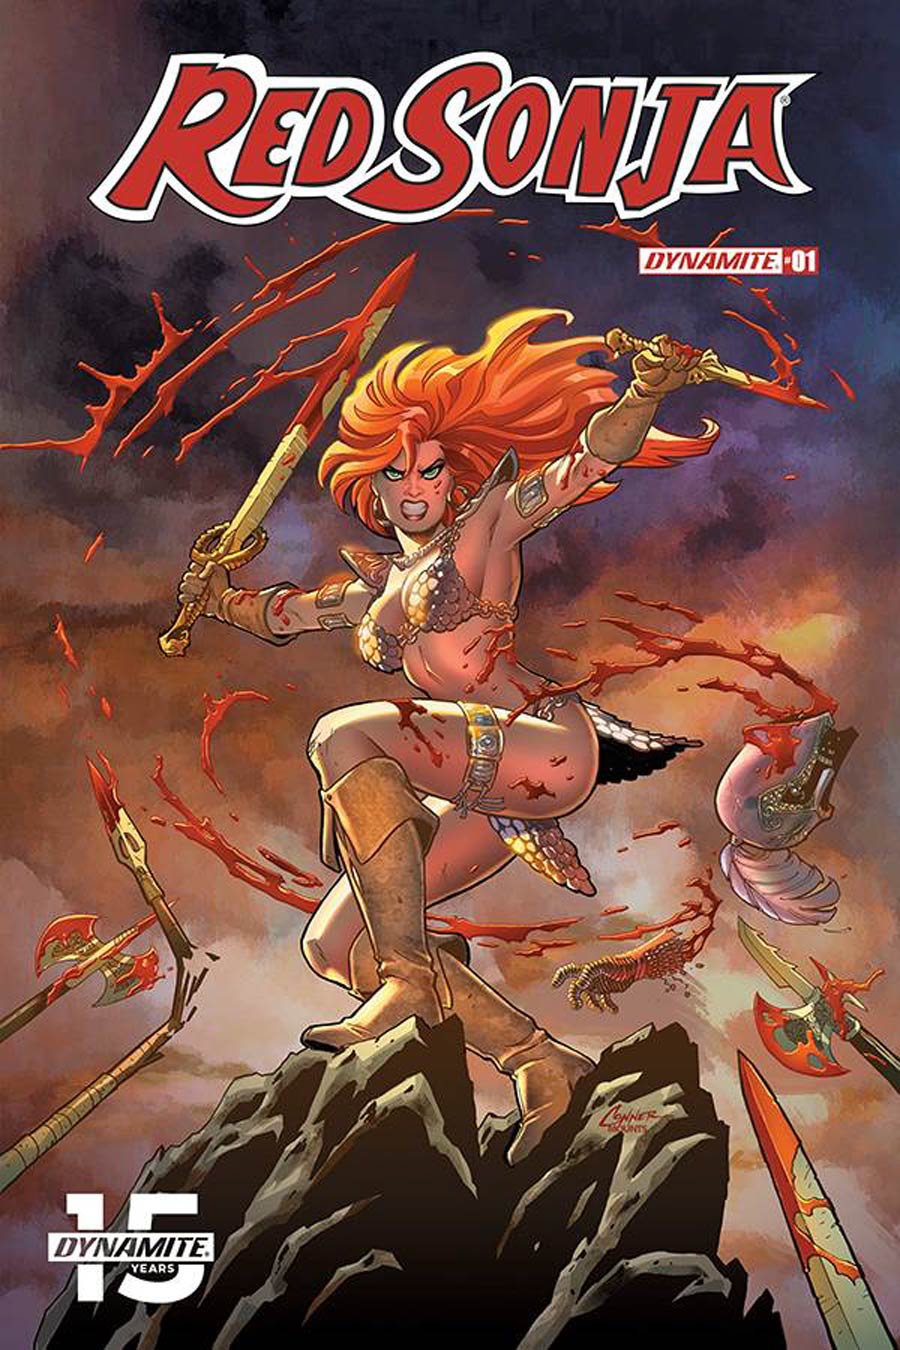 Red Sonja Vol 8 #1 Cover S Limited Edition Amanda Conner Cover CGC Graded